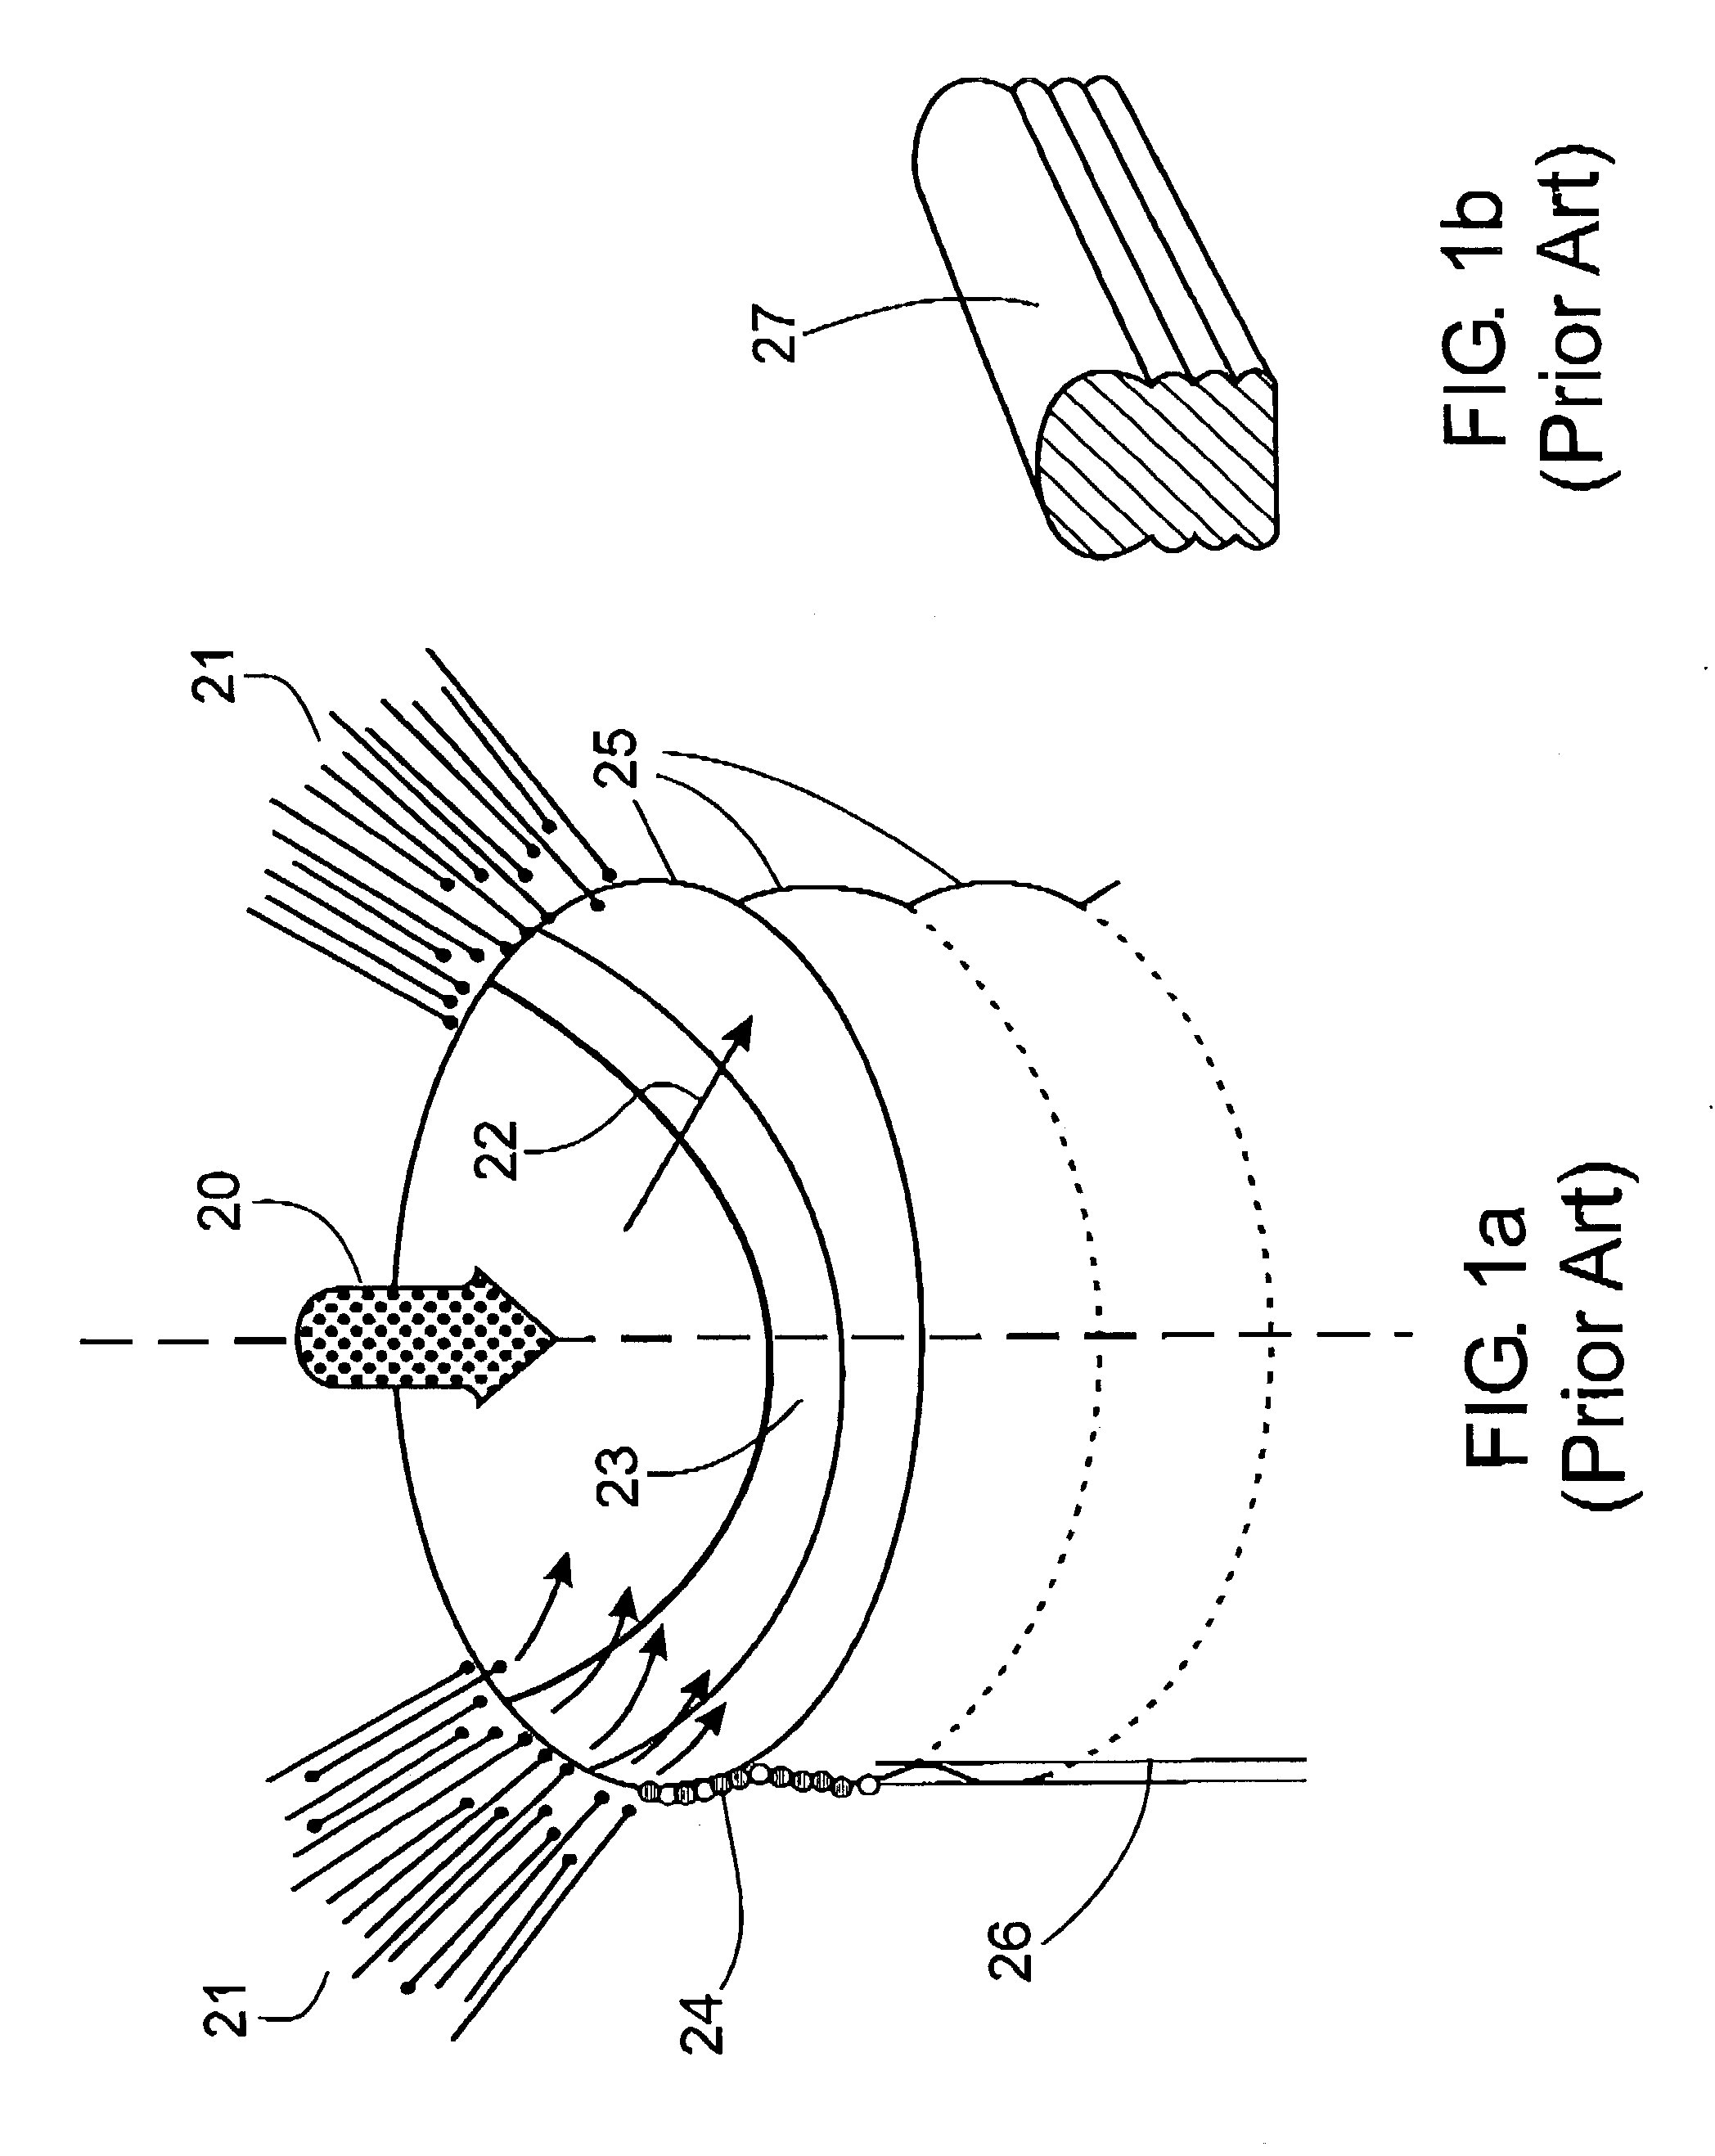 Laser consolidation apparatus for manufacturing precise structures